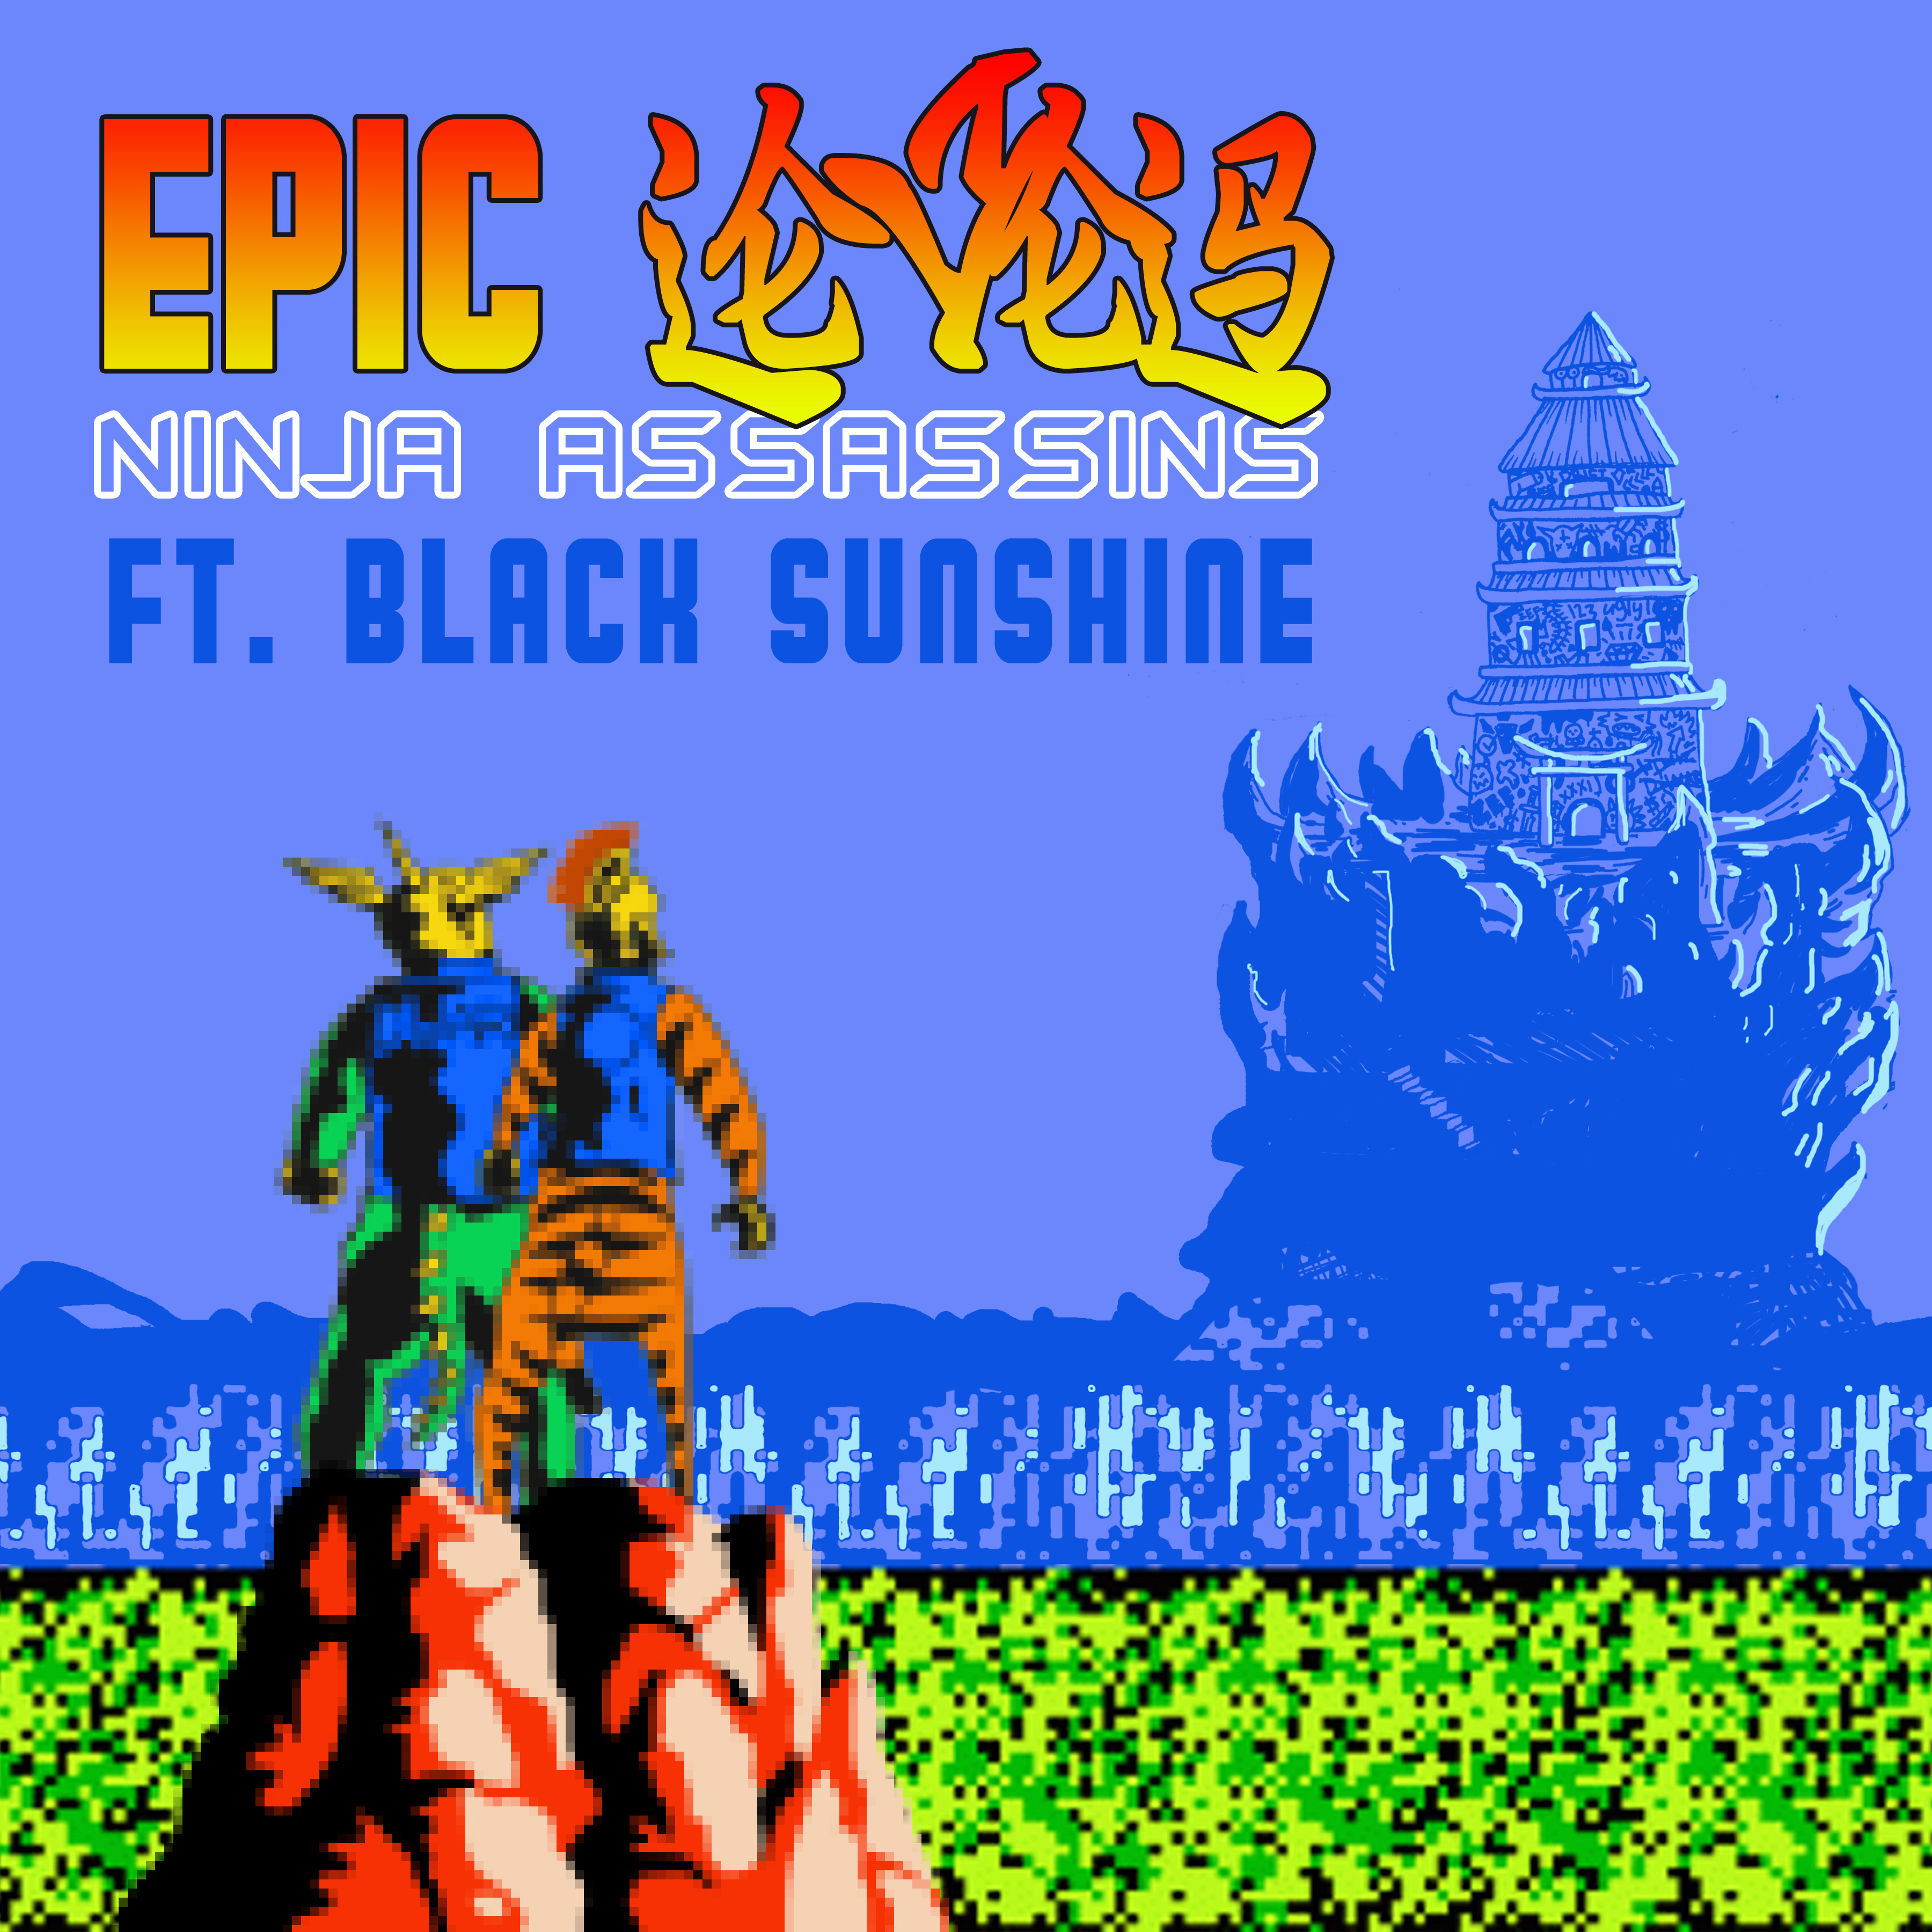 Epic Levels Ninja Assassins single art featuring Black Sunshine Dragon Warrior and Tiger Wizard stand on a mountain summit looking at a Japanese castle on top of a mountain in the distance in the style of an 8 bit video game